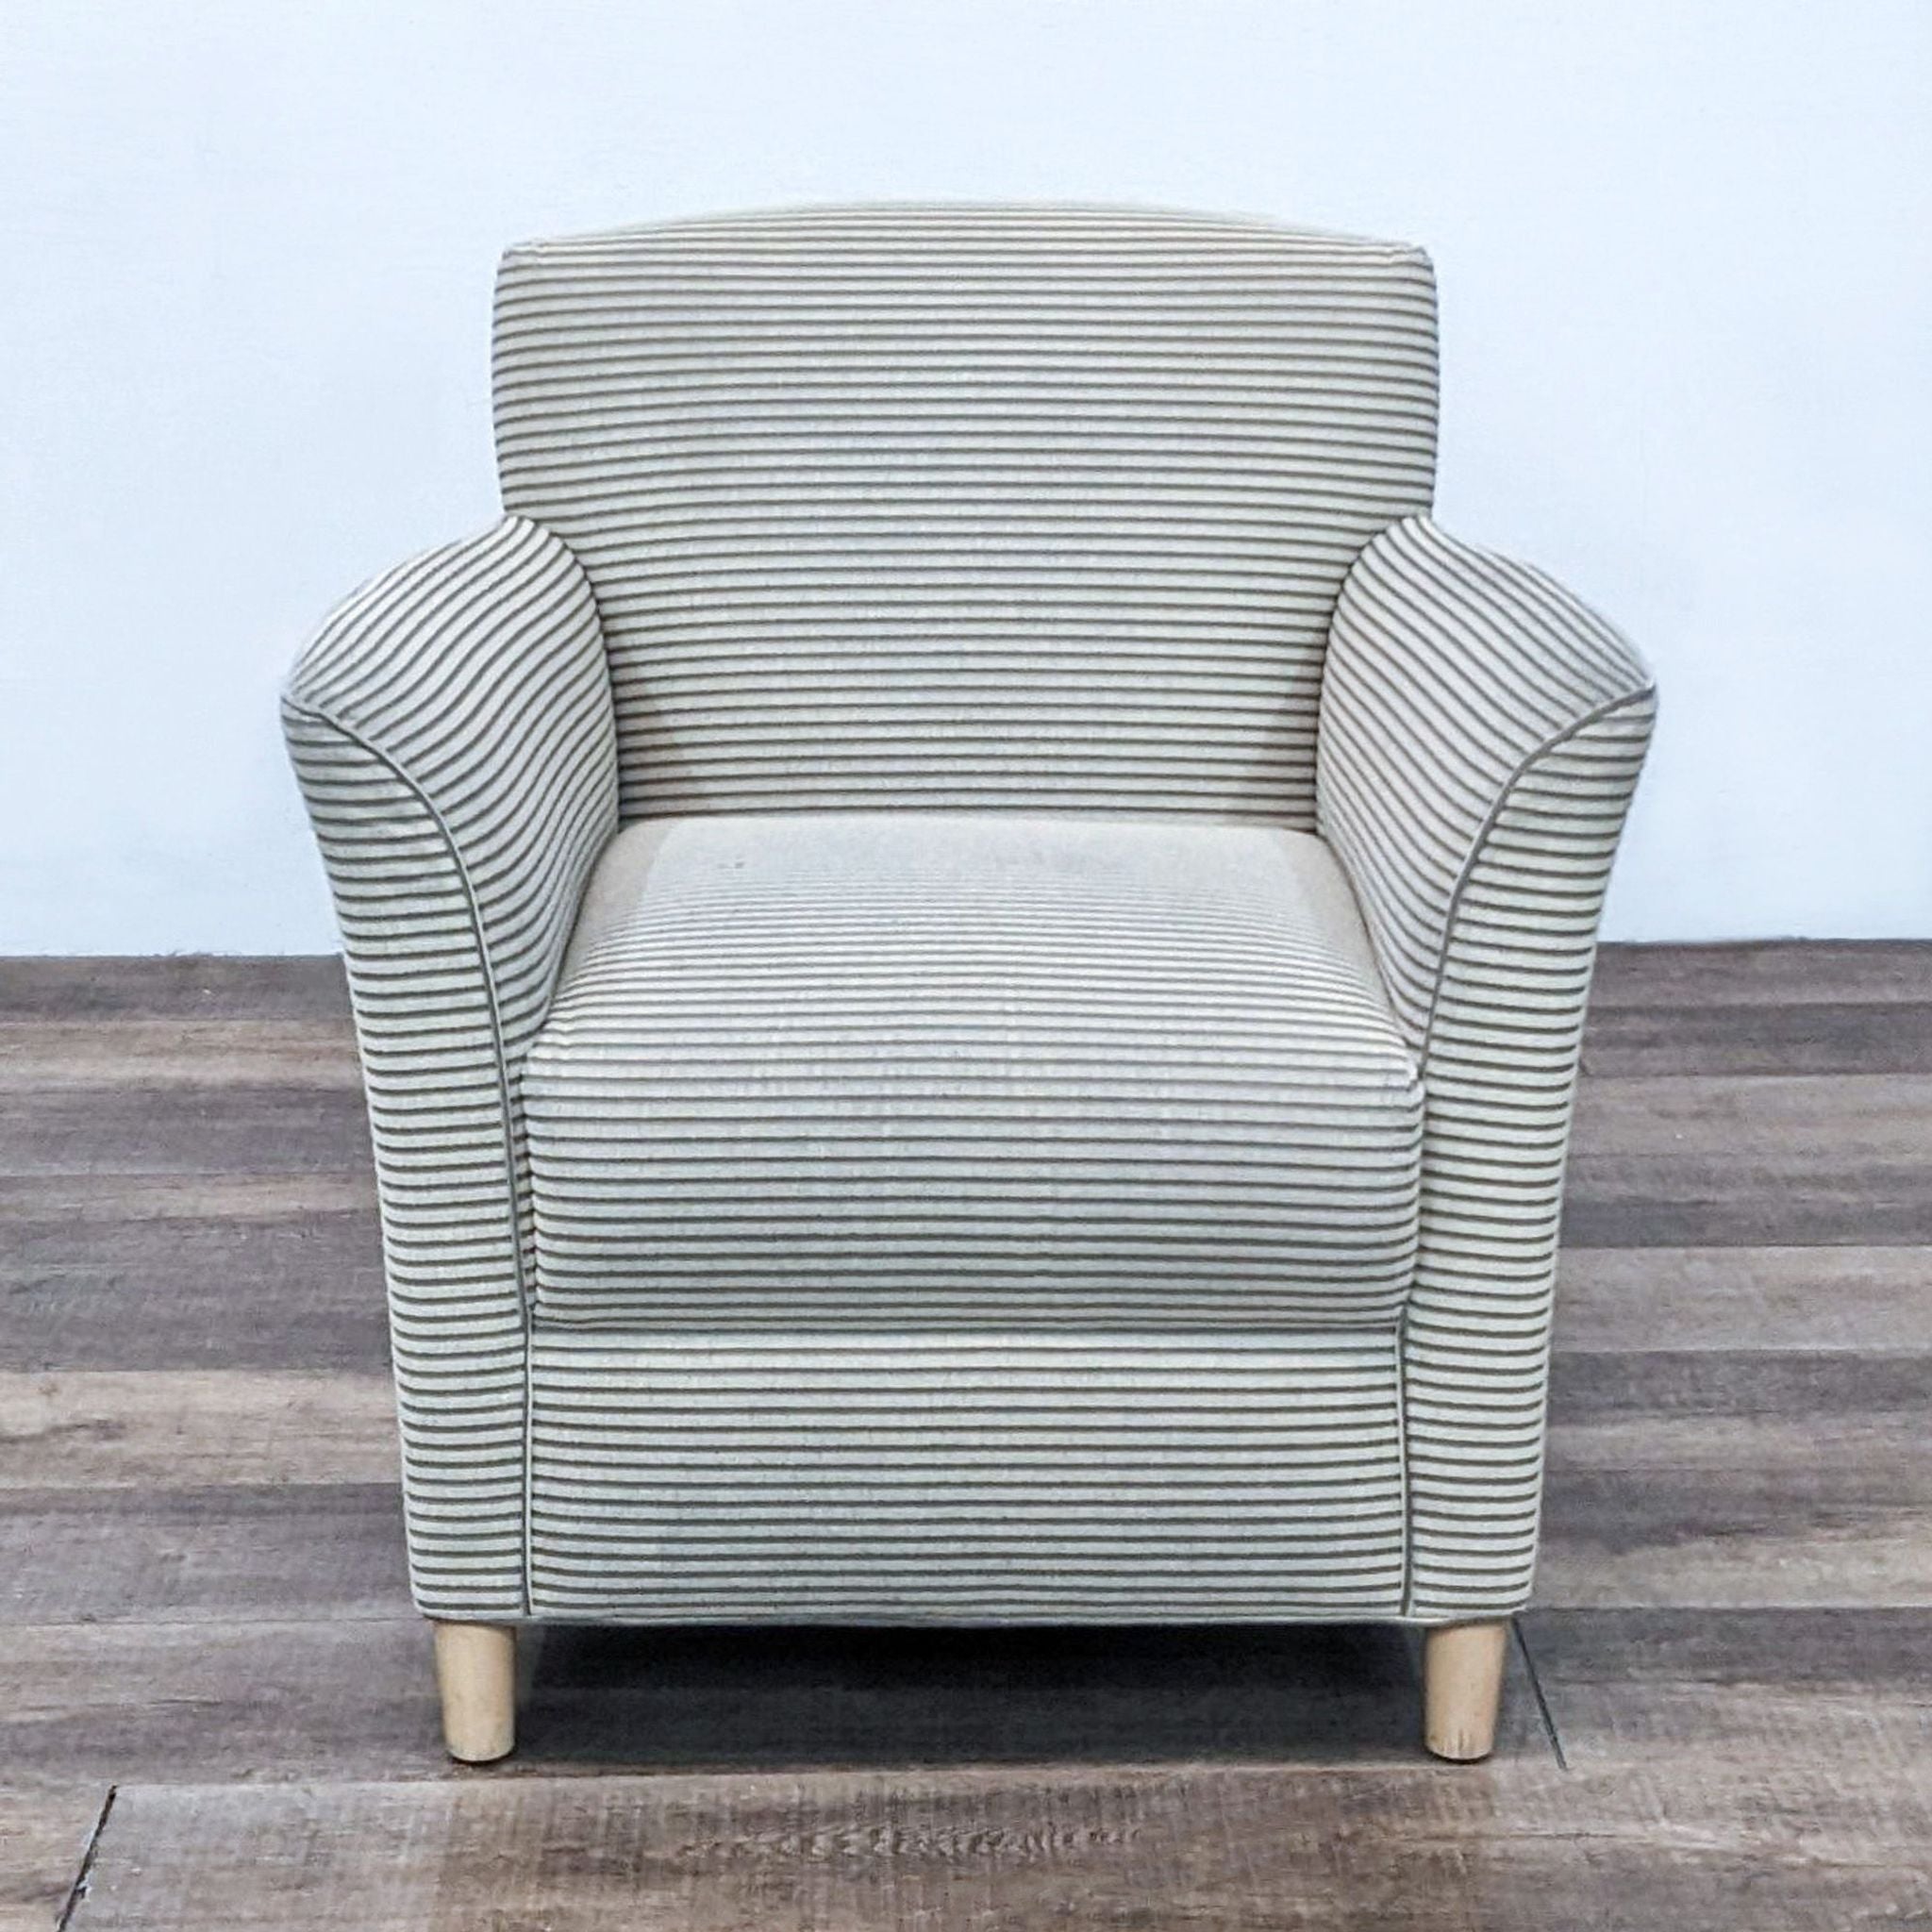 Contemporary Bernhardt club chair with rolled arms, striped upholstery, and tapered wooden feet viewed from the front.